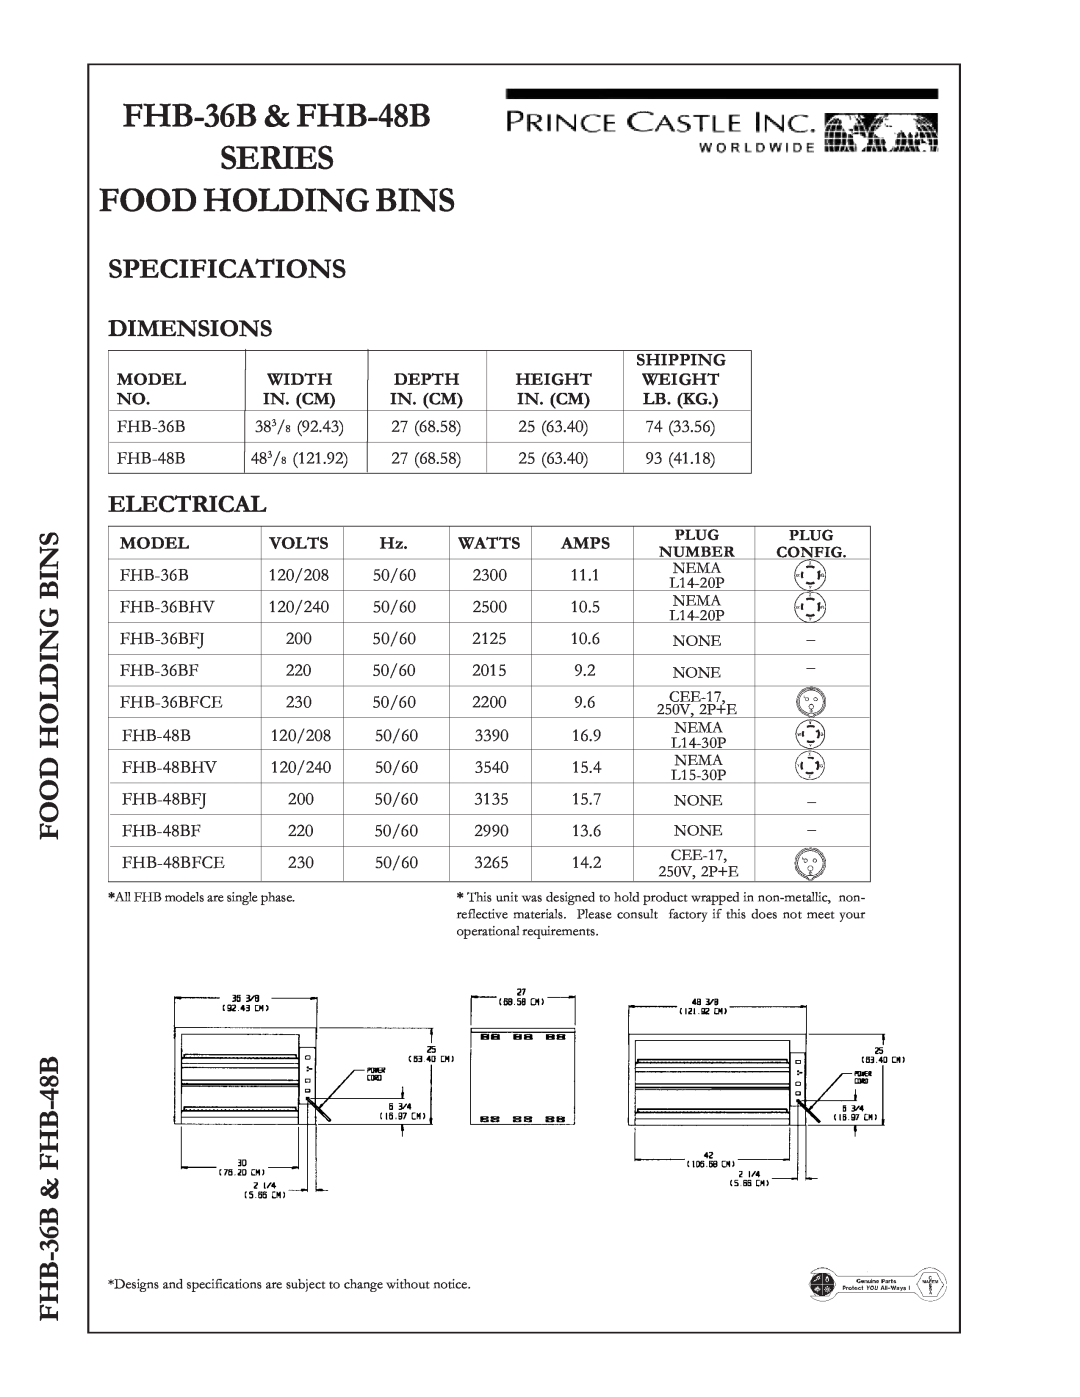 Prince Castle Specifications, FHB-36B& FHB-48B SERIES FOOD HOLDING BINS, FOOD HOLDING BINS FHB-36B& FHB-48B, Dimensions 